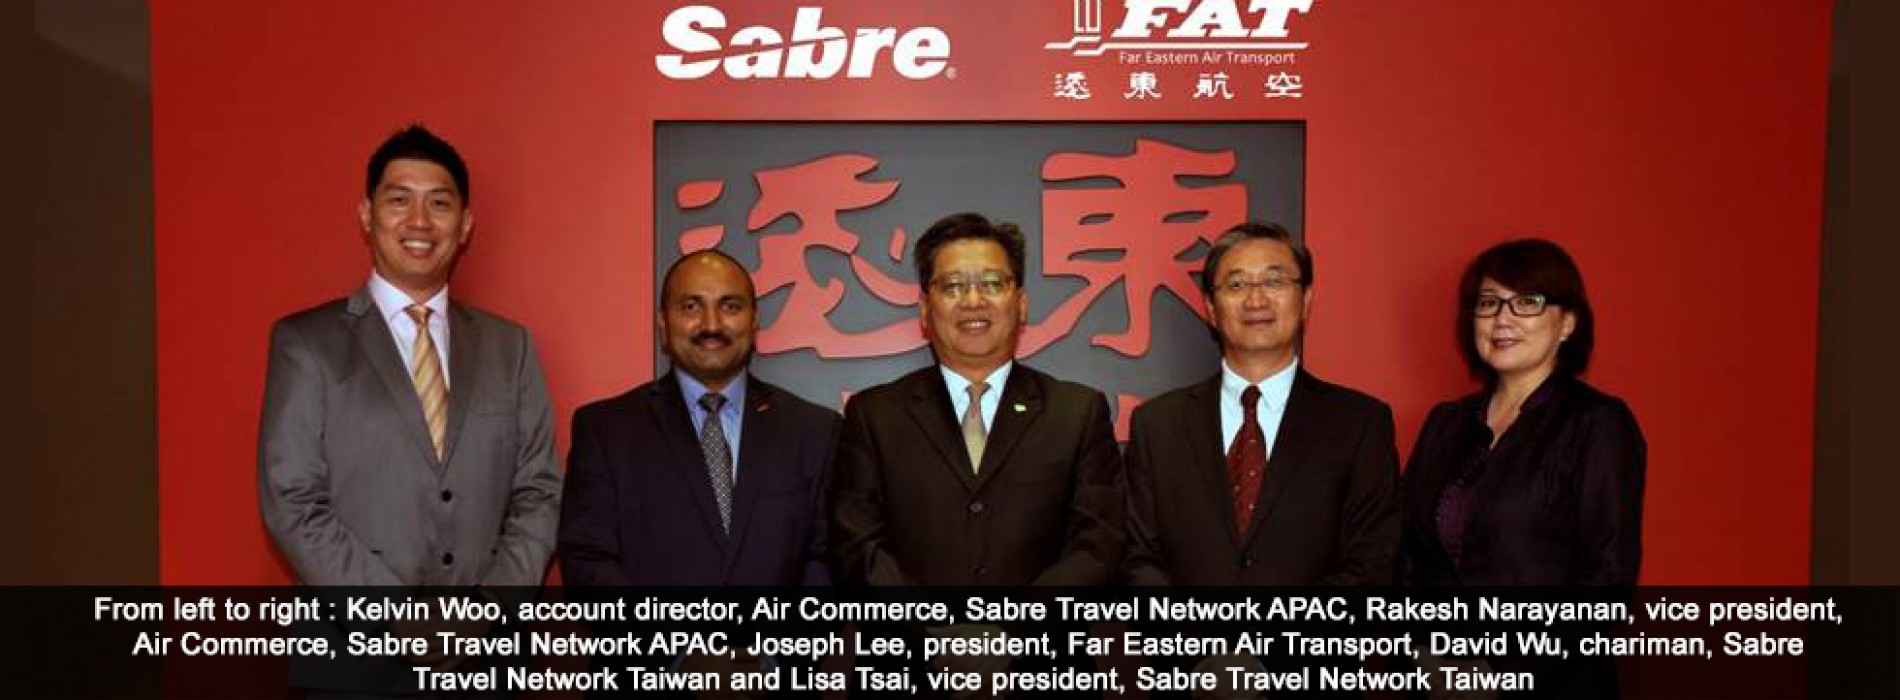 Sabre and Far Eastern Air Transport enter New Partnership